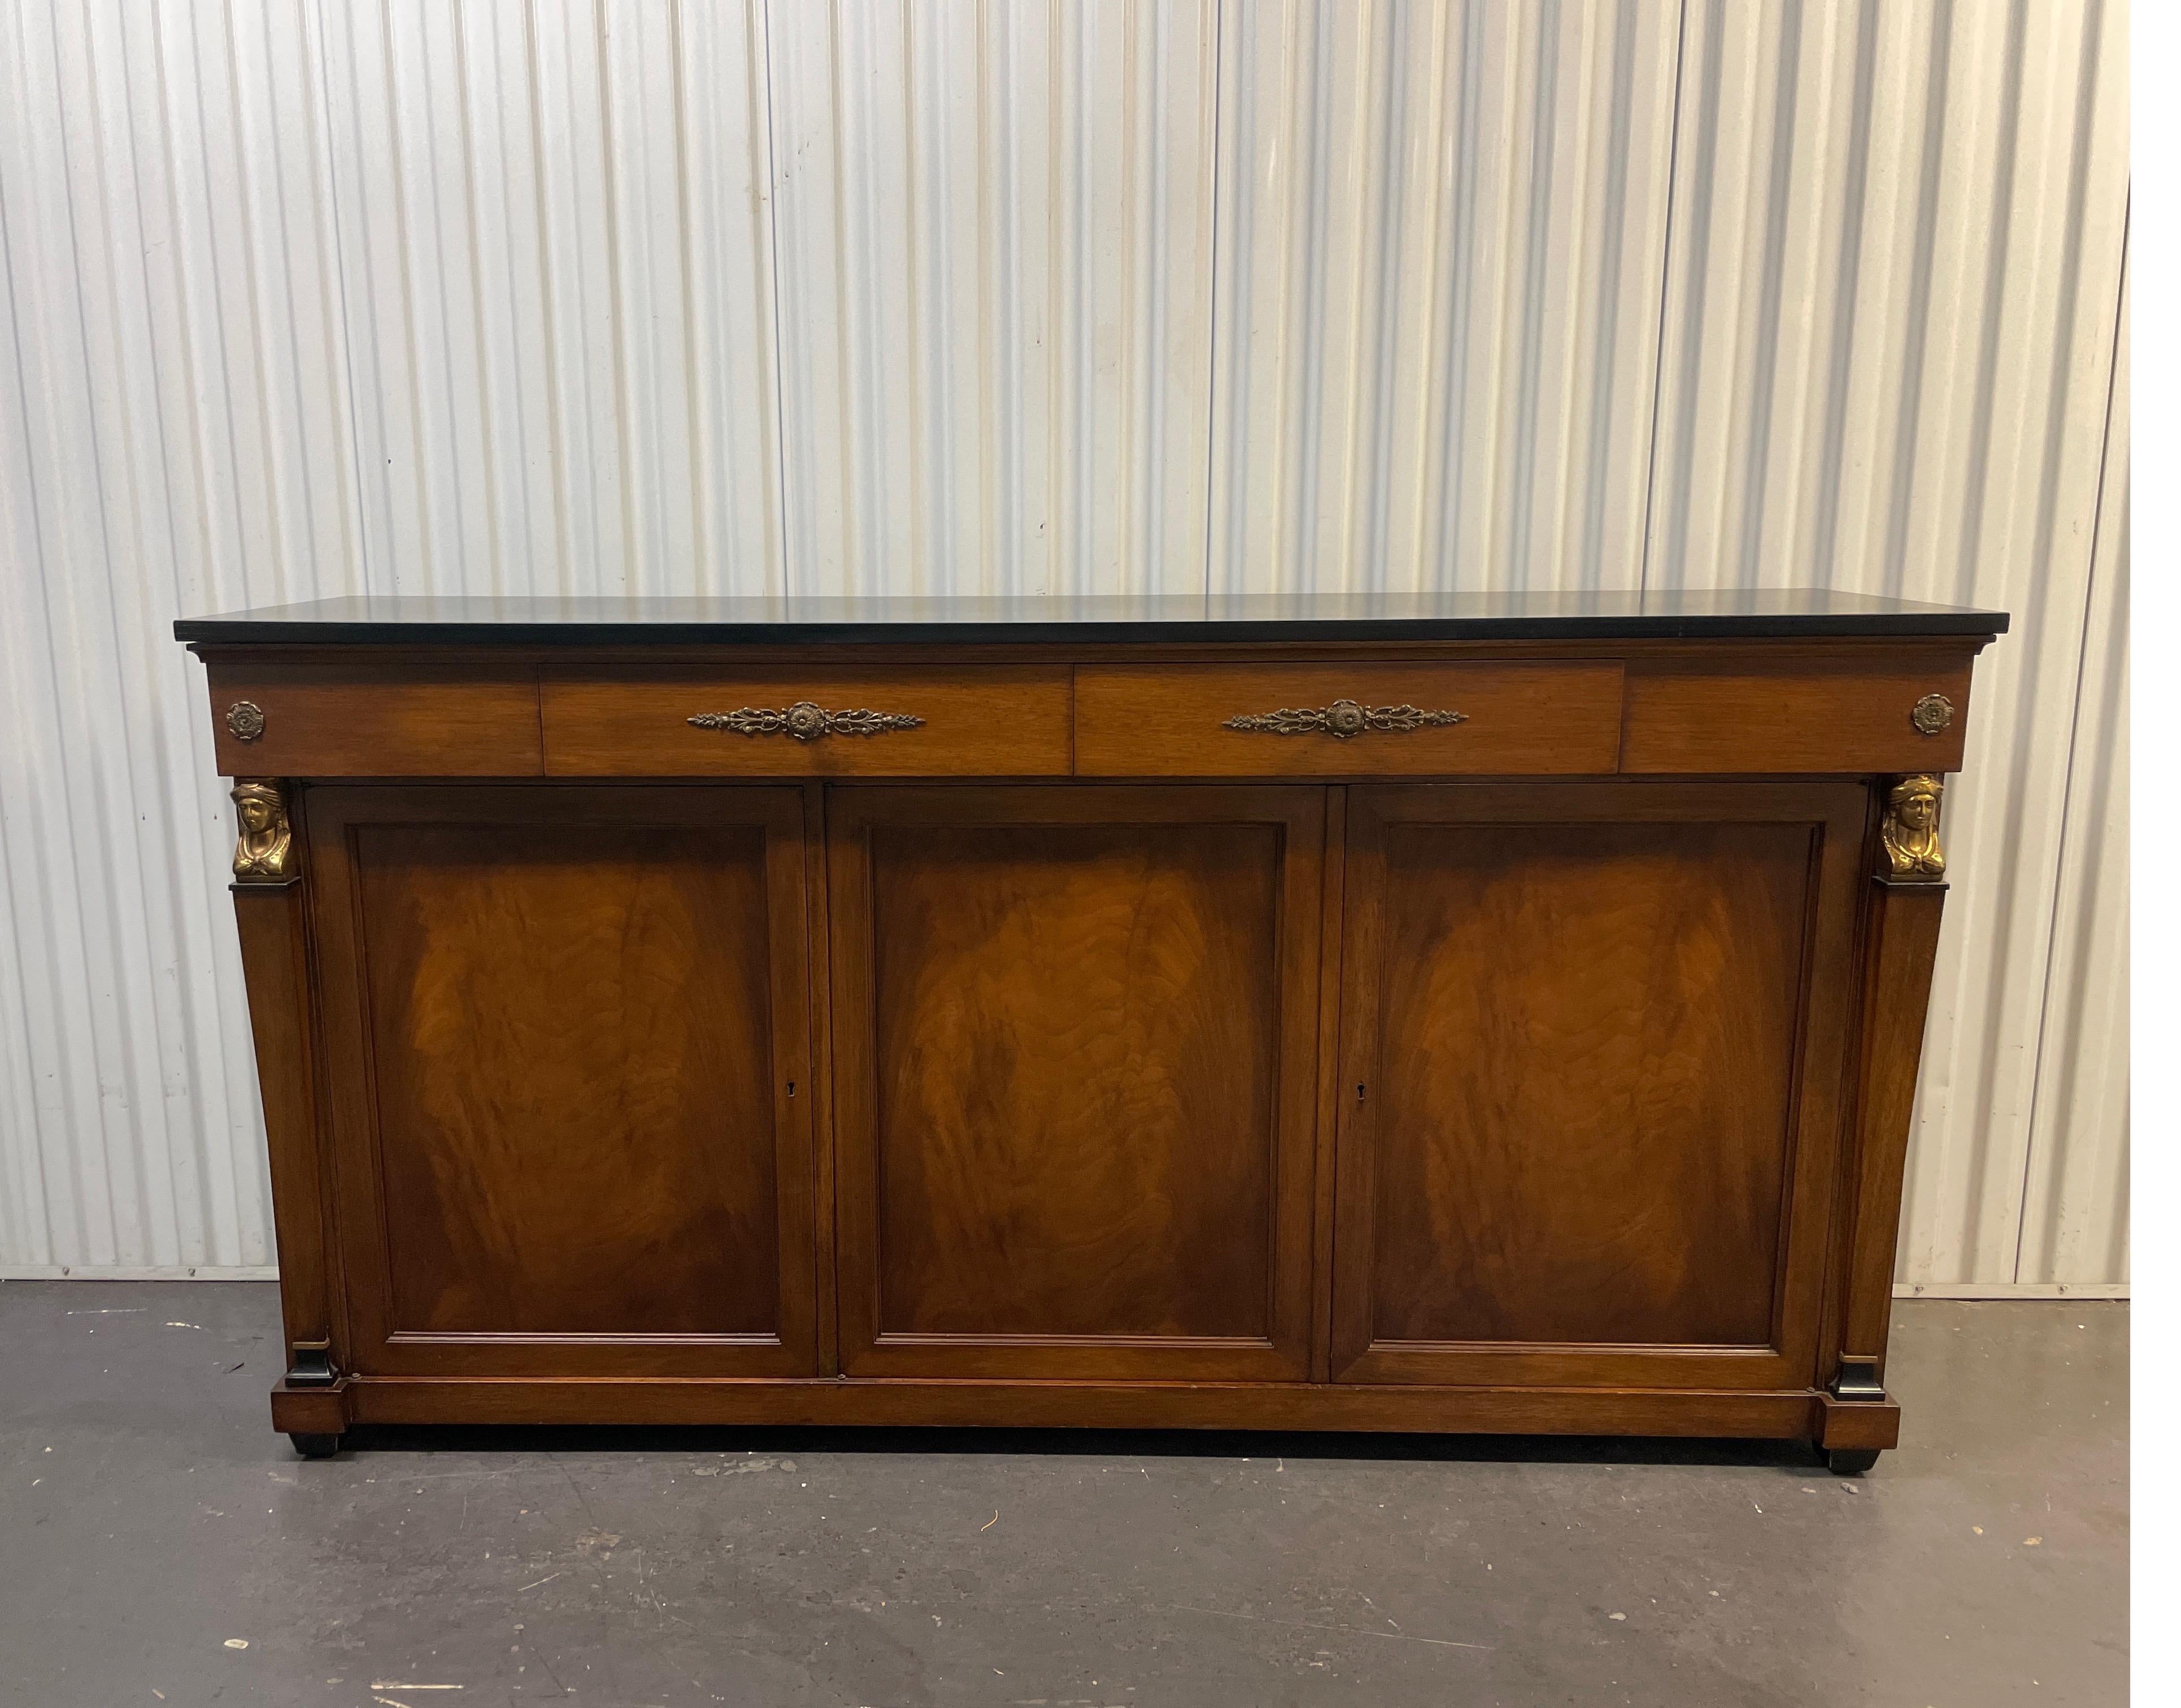 Vintage Neoclassical style sideboard with two drawers over three doors. Rich walnut color base with black painted top. Adjustable shelves for ample storage.